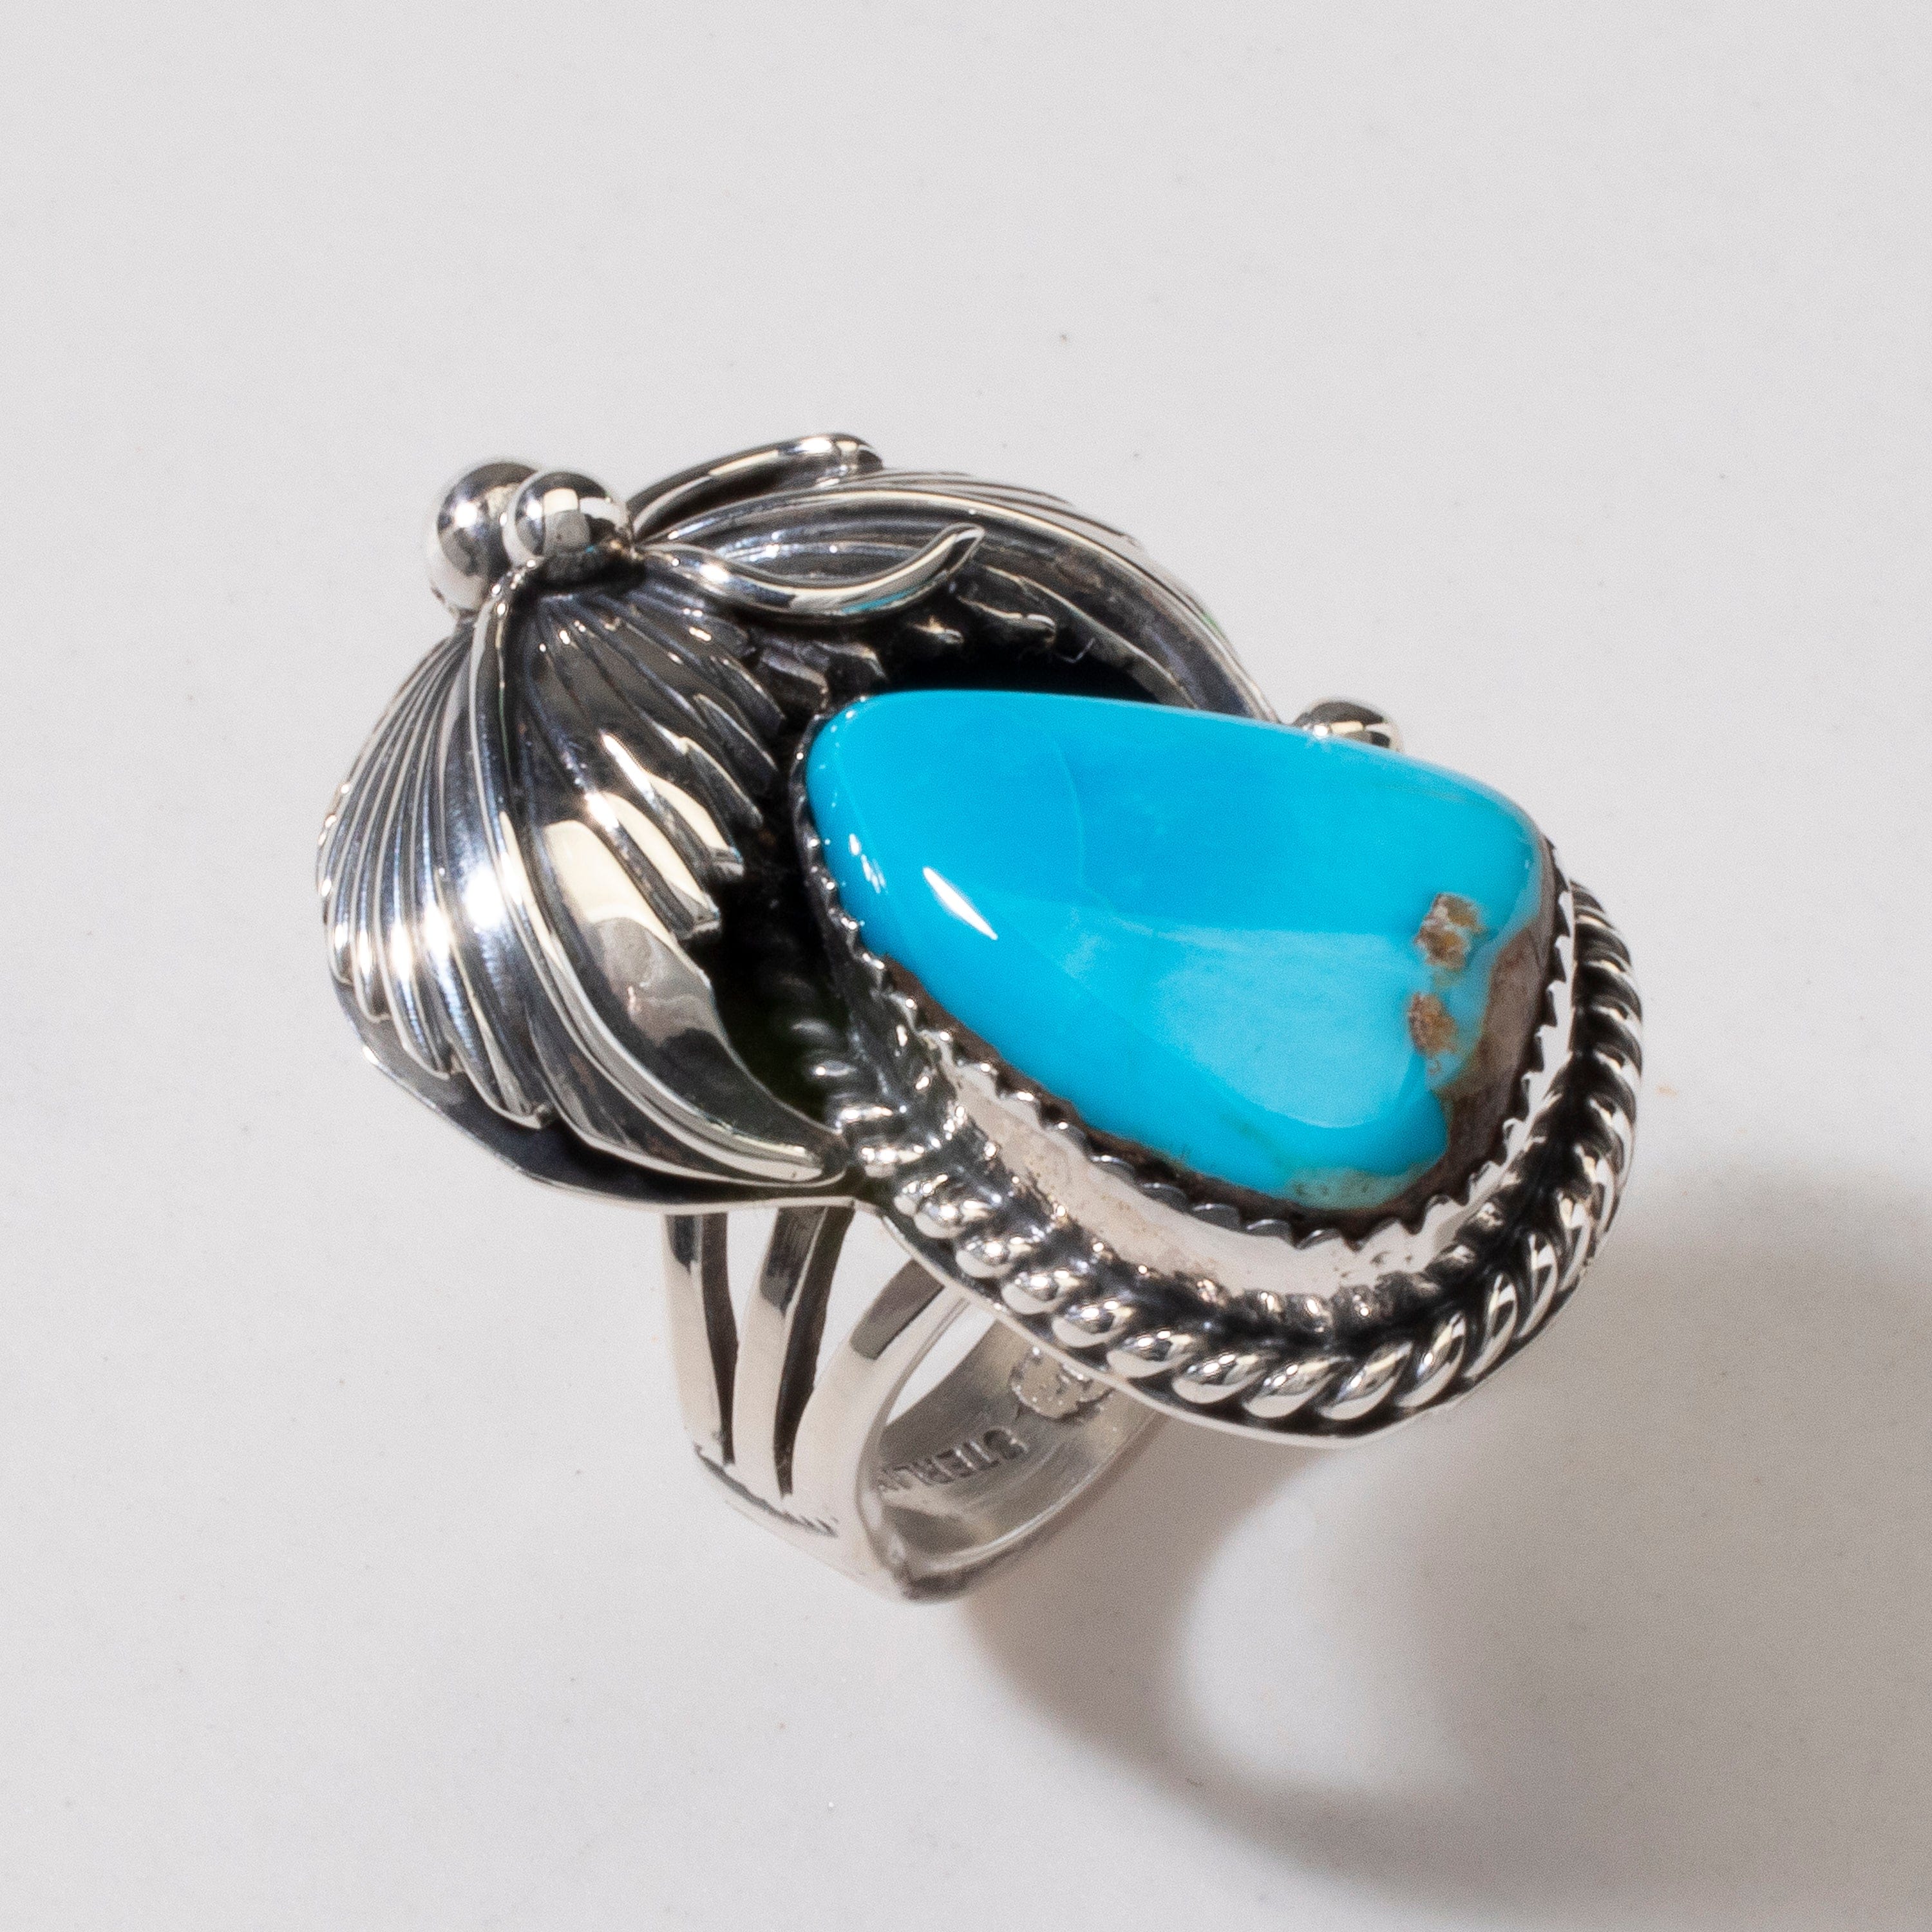 Kalifano Native American Jewelry 6 Joe Piaso Jr. Sleeping Beauty Turquoise Feather Navajo USA Native American Made 925 Sterling Silver Ring NAR700.033.6